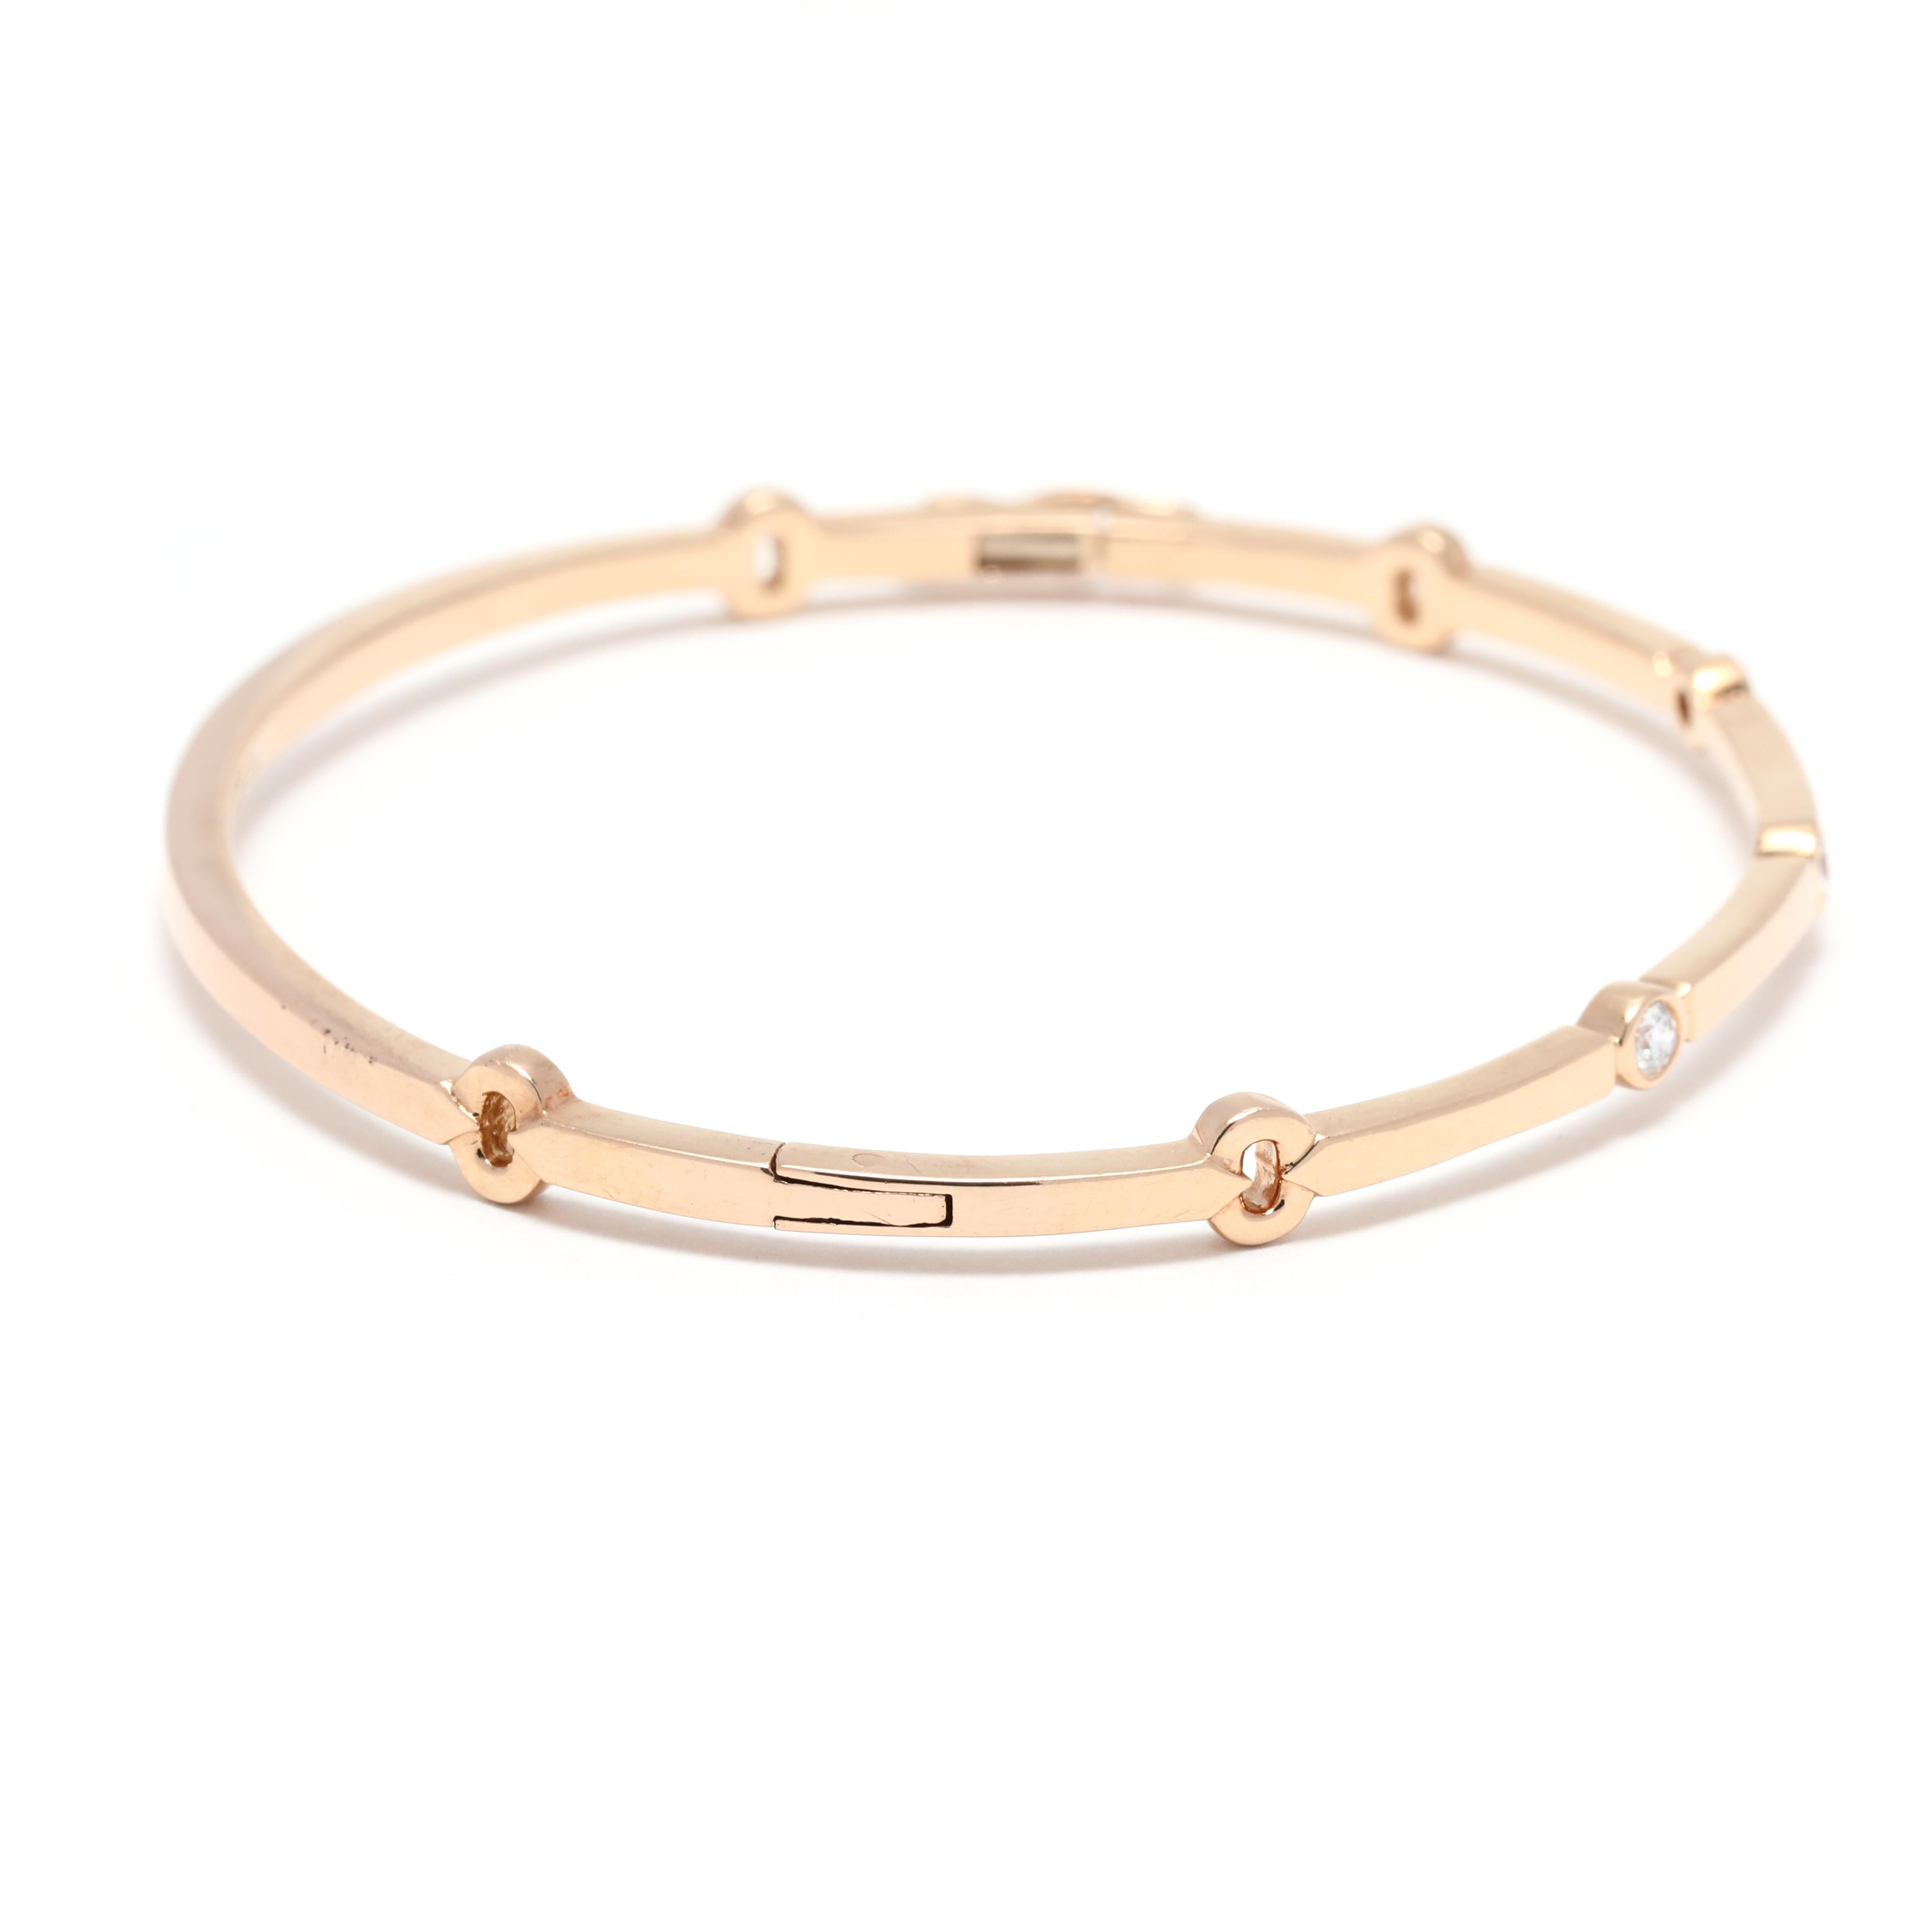 This exquisite Hearts on Fire .15ctw Diamond Bangle Bracelet is crafted in 18K Rose Gold and features a hinged design. The diamond bangle showcases an array of multi-stone stones, and has a length of 6.75 inches. Perfect for any special occasion,